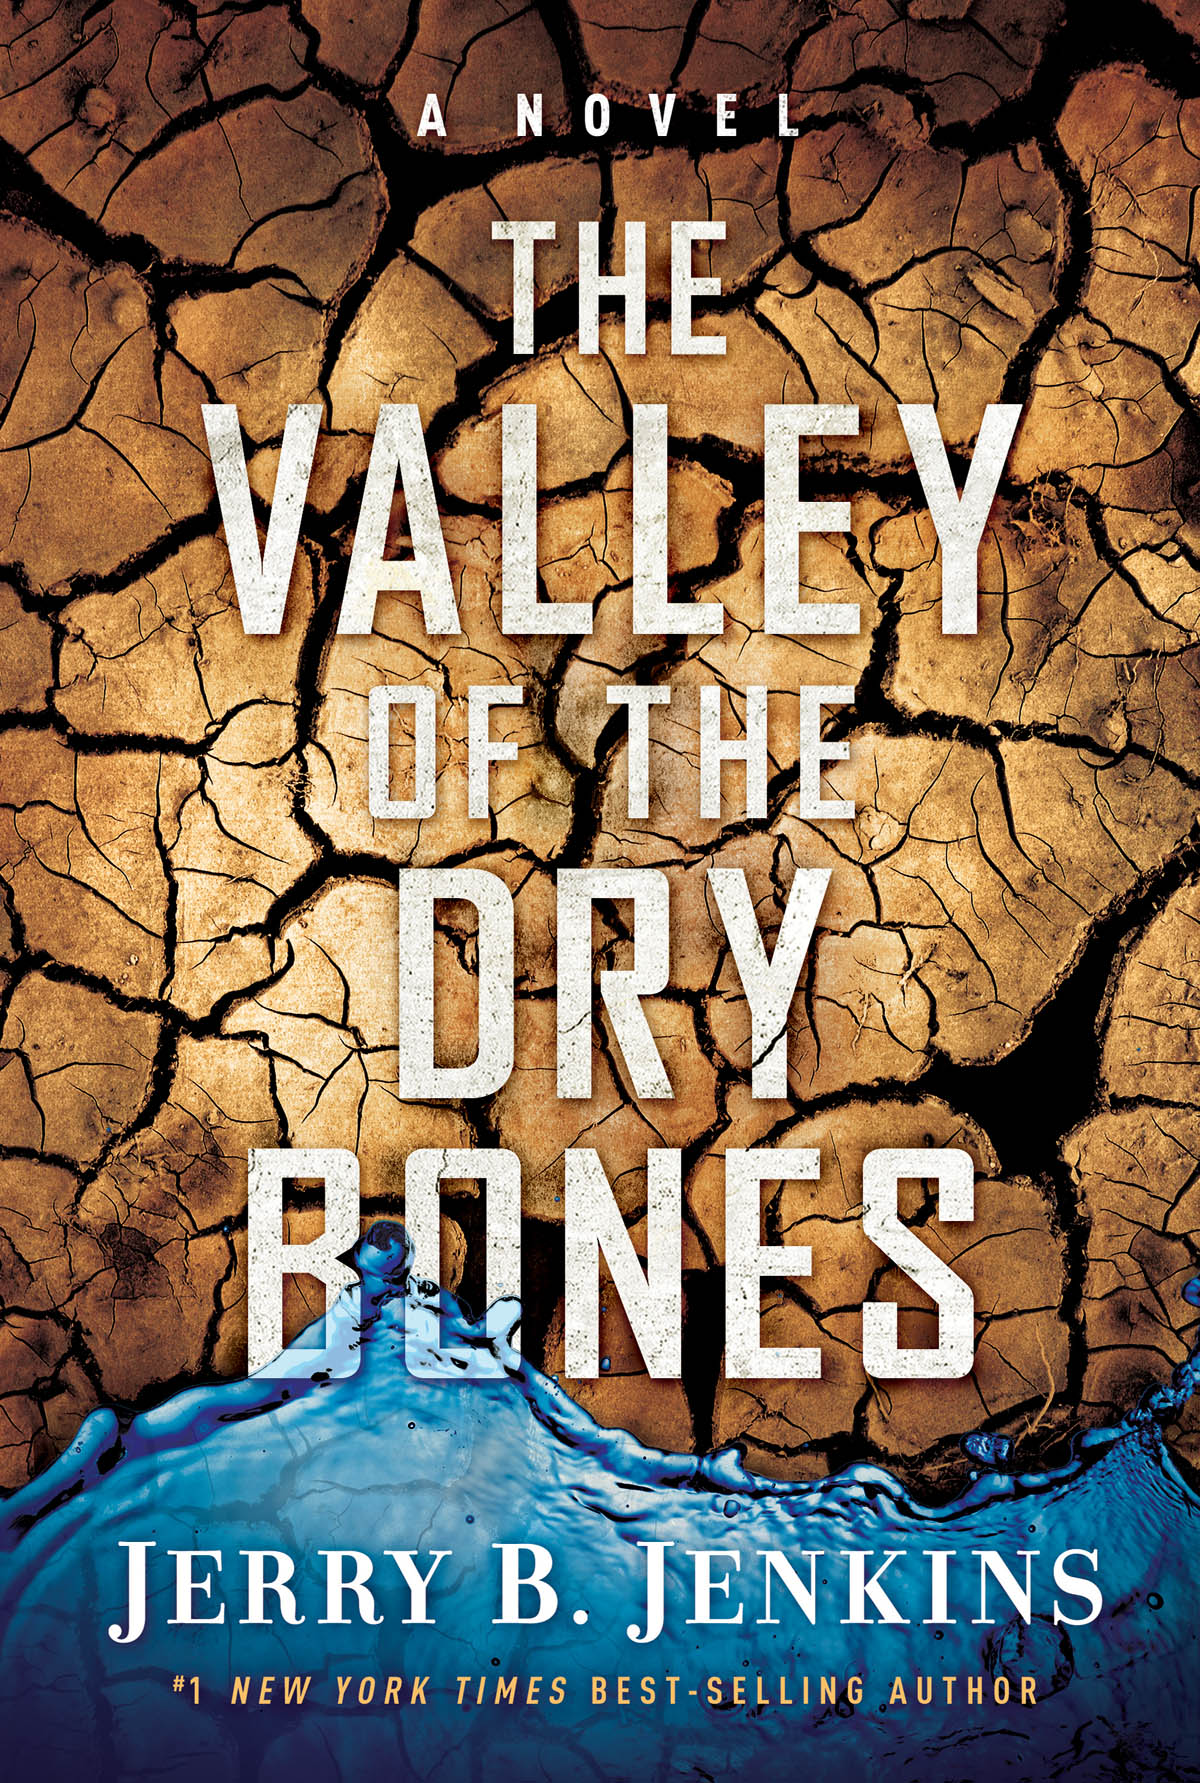 The Valley of Dry Bones (2016) by Jerry B. Jenkins